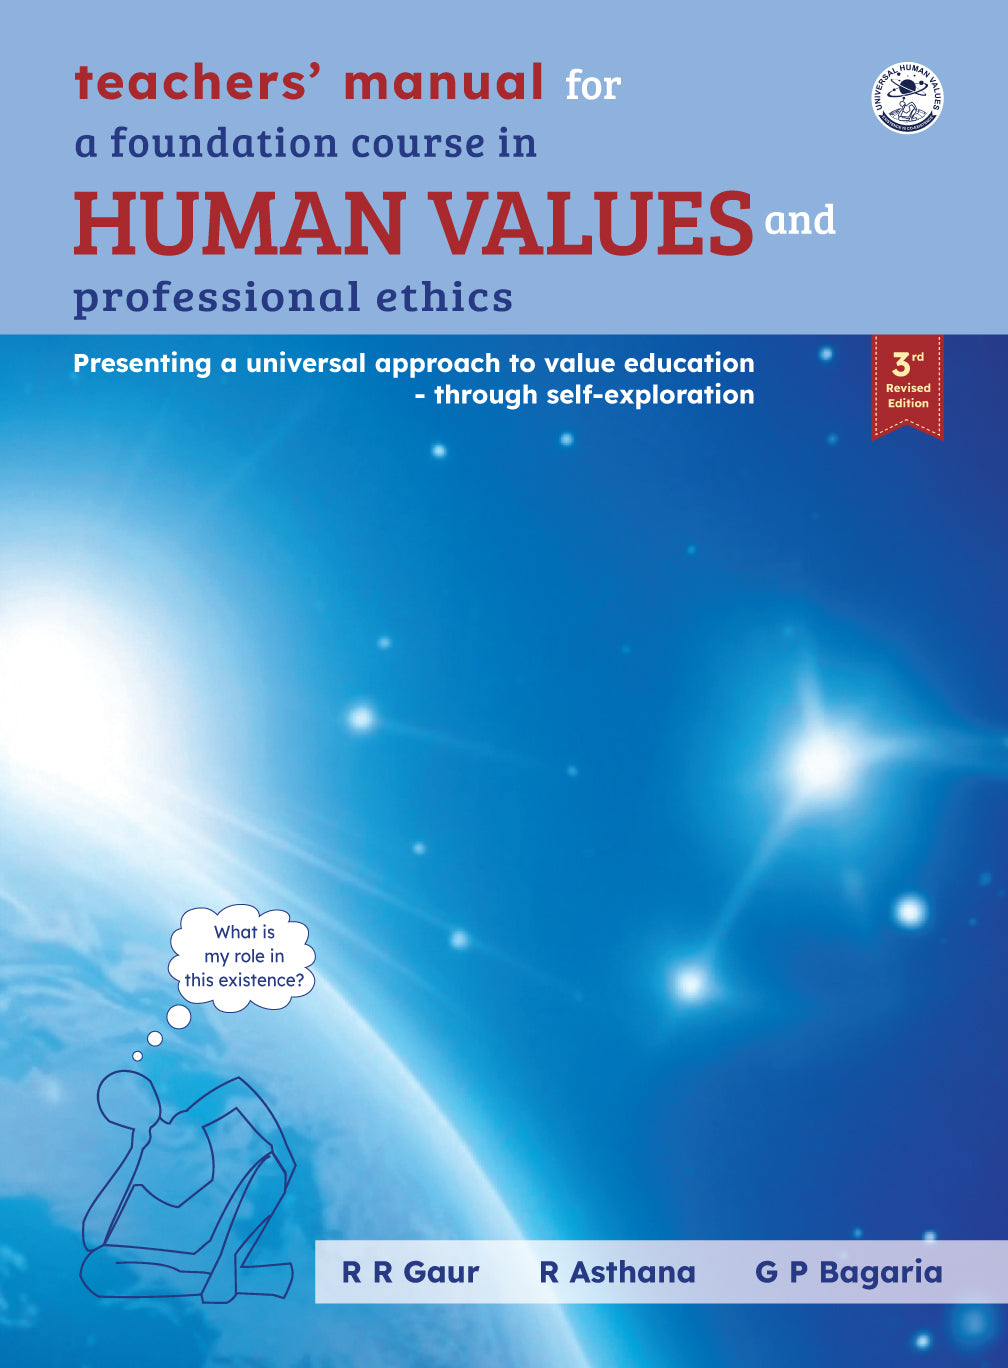 Teachers' Manual for A Foundation Course in Human Values and Professional Ethics